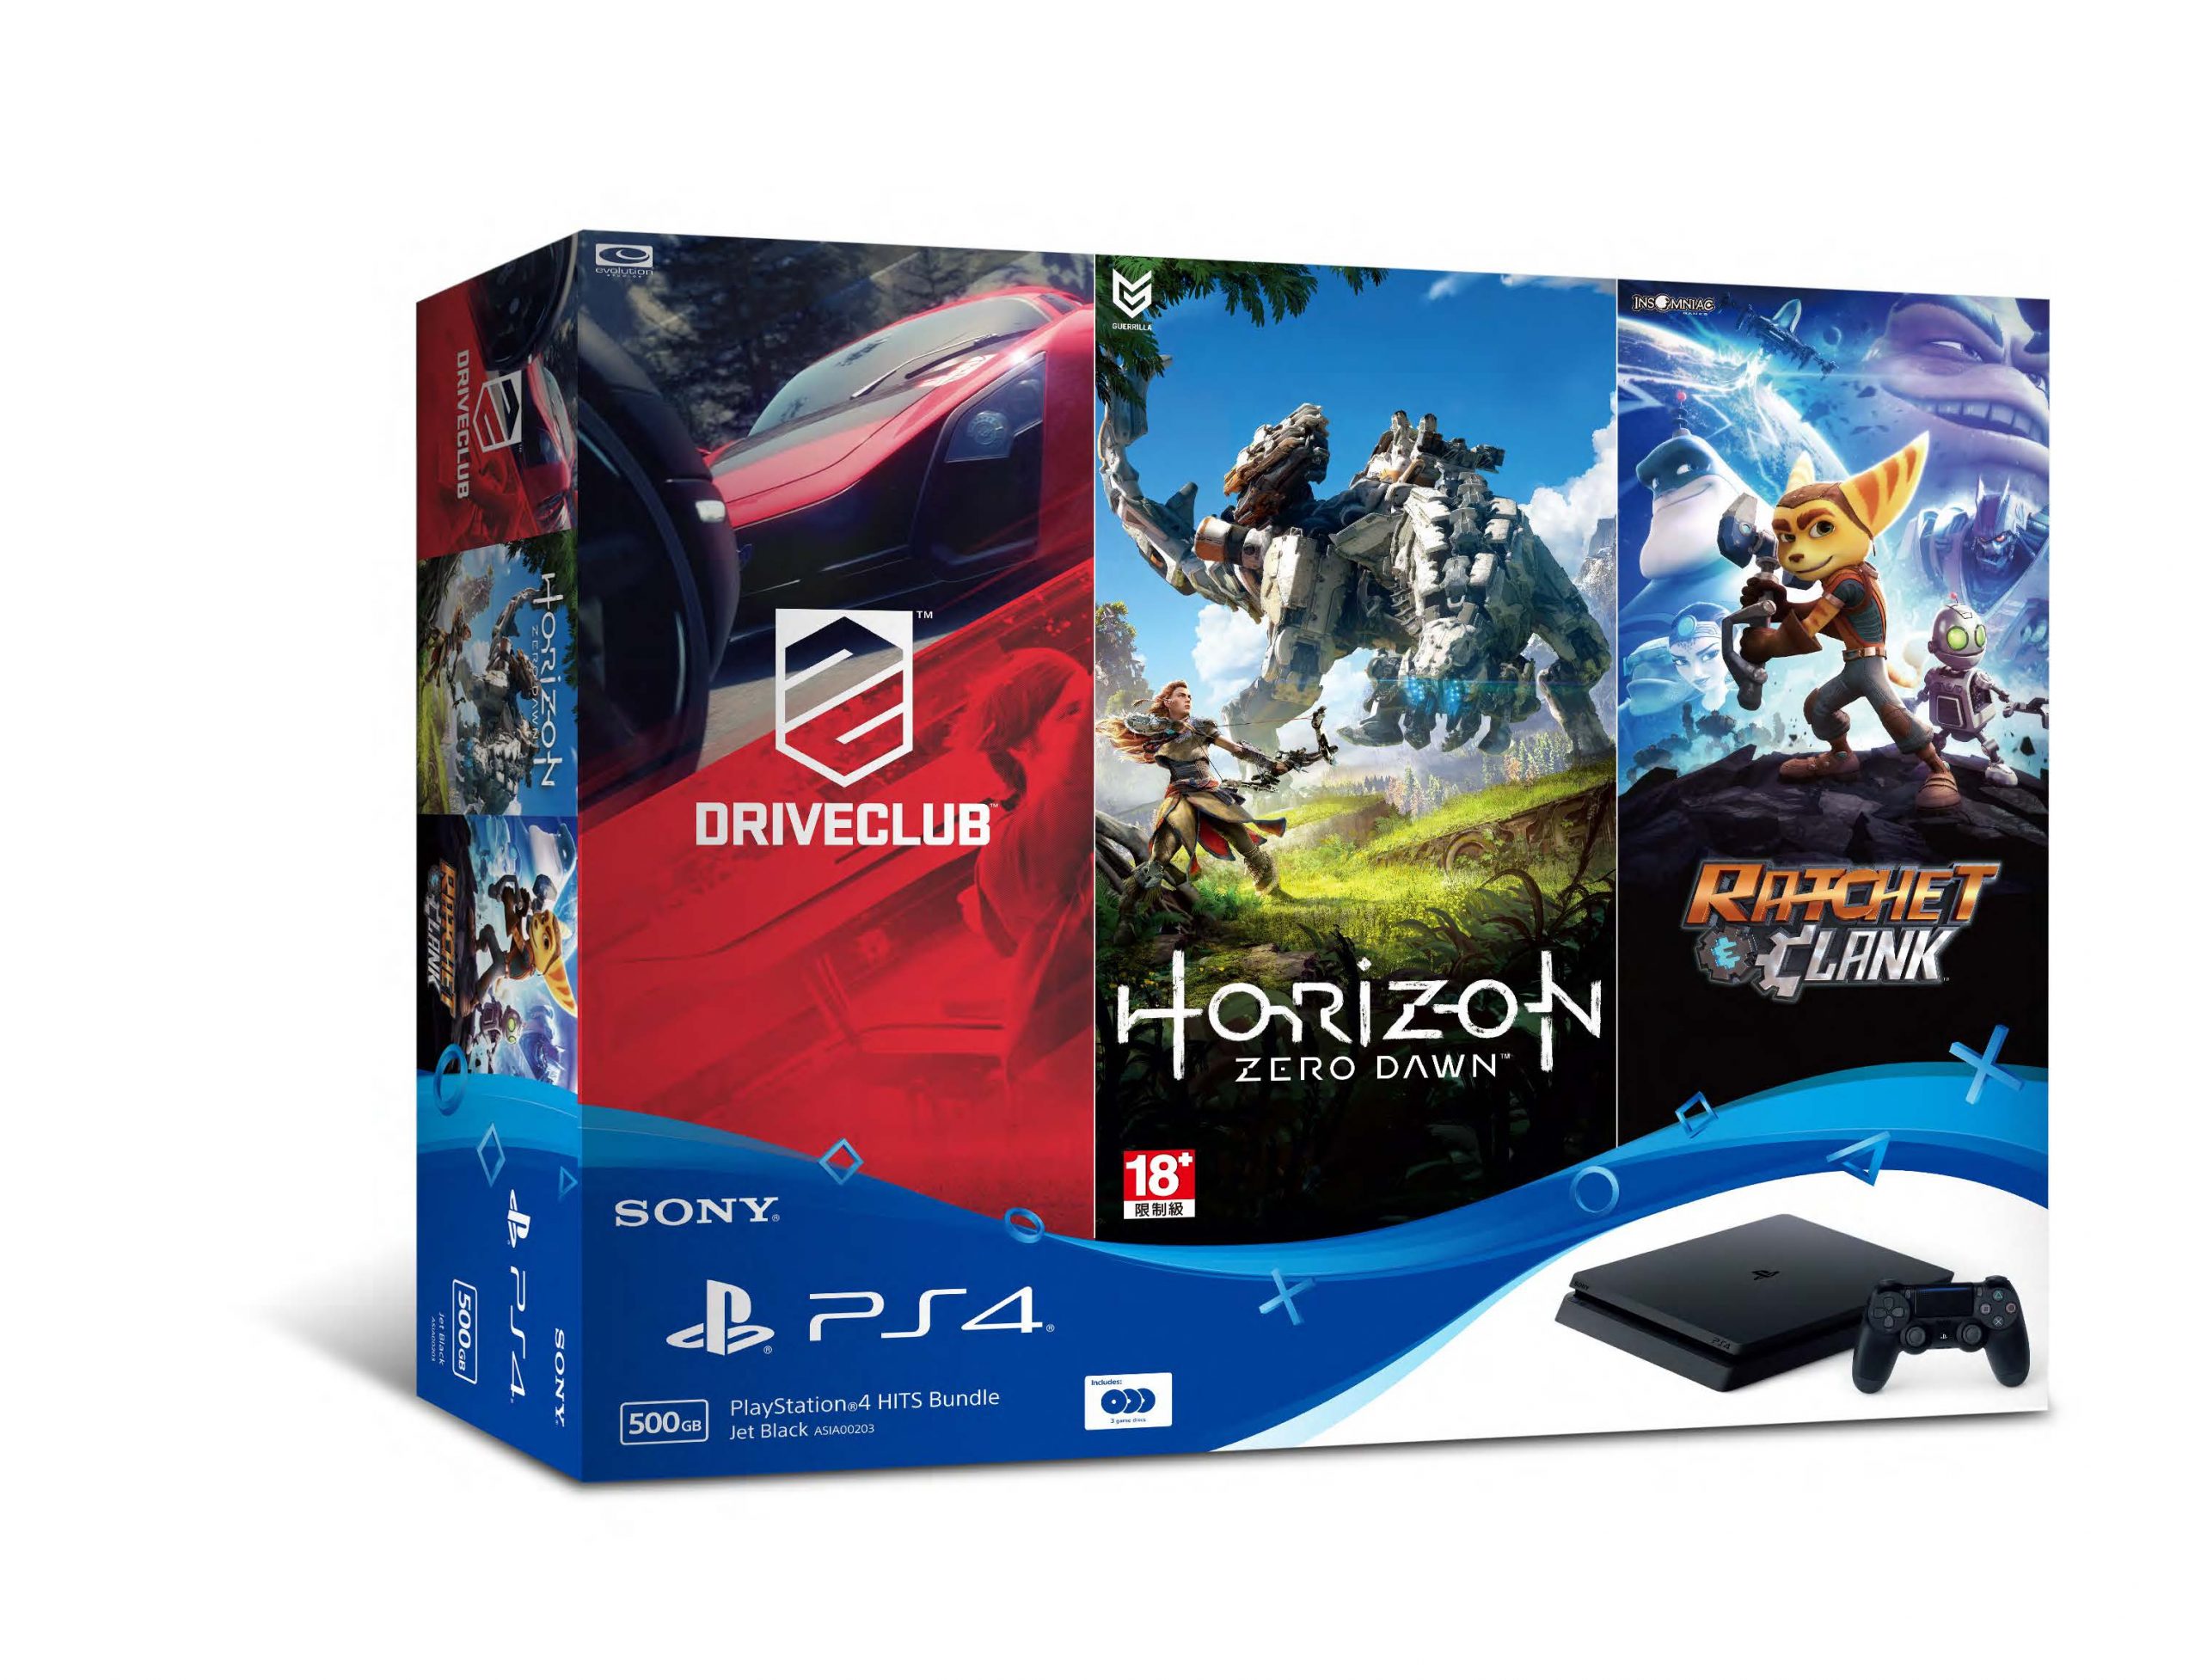 “PlayStation 4 HITS Bundle”  to be launched on May 3